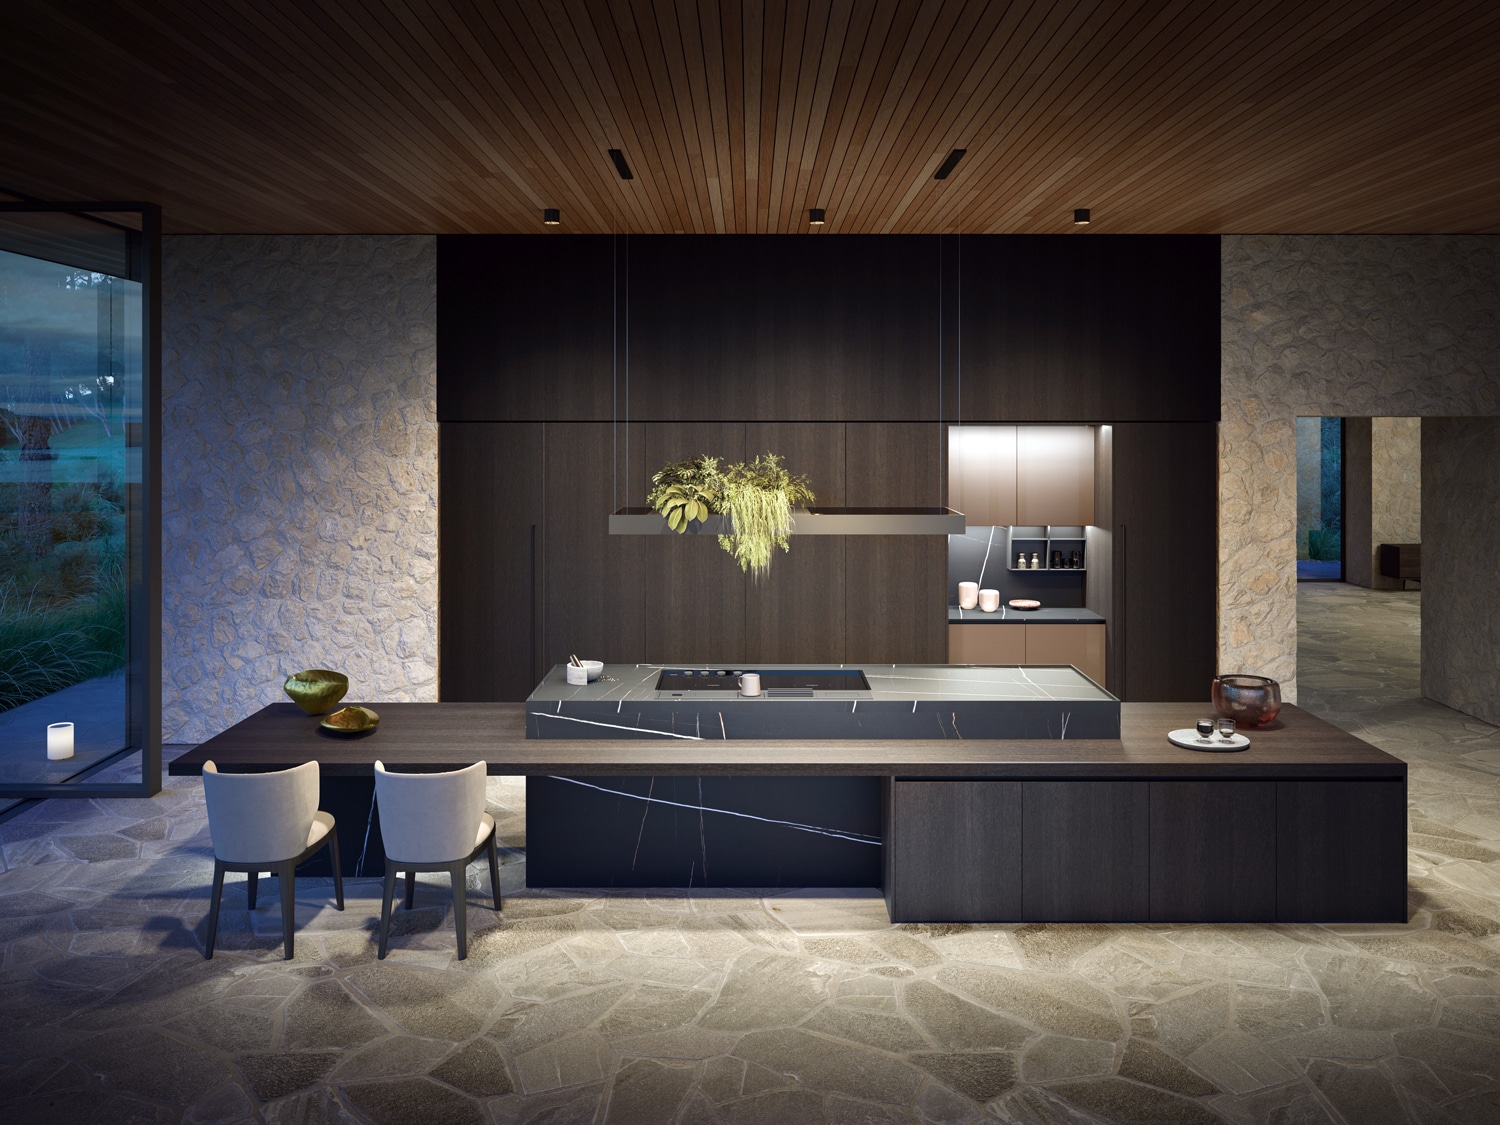 This luxury kitchen design transcends the concept of cooking area, living in harmony with the home architecture and transforming the space into an aesthetic and functional experience. 